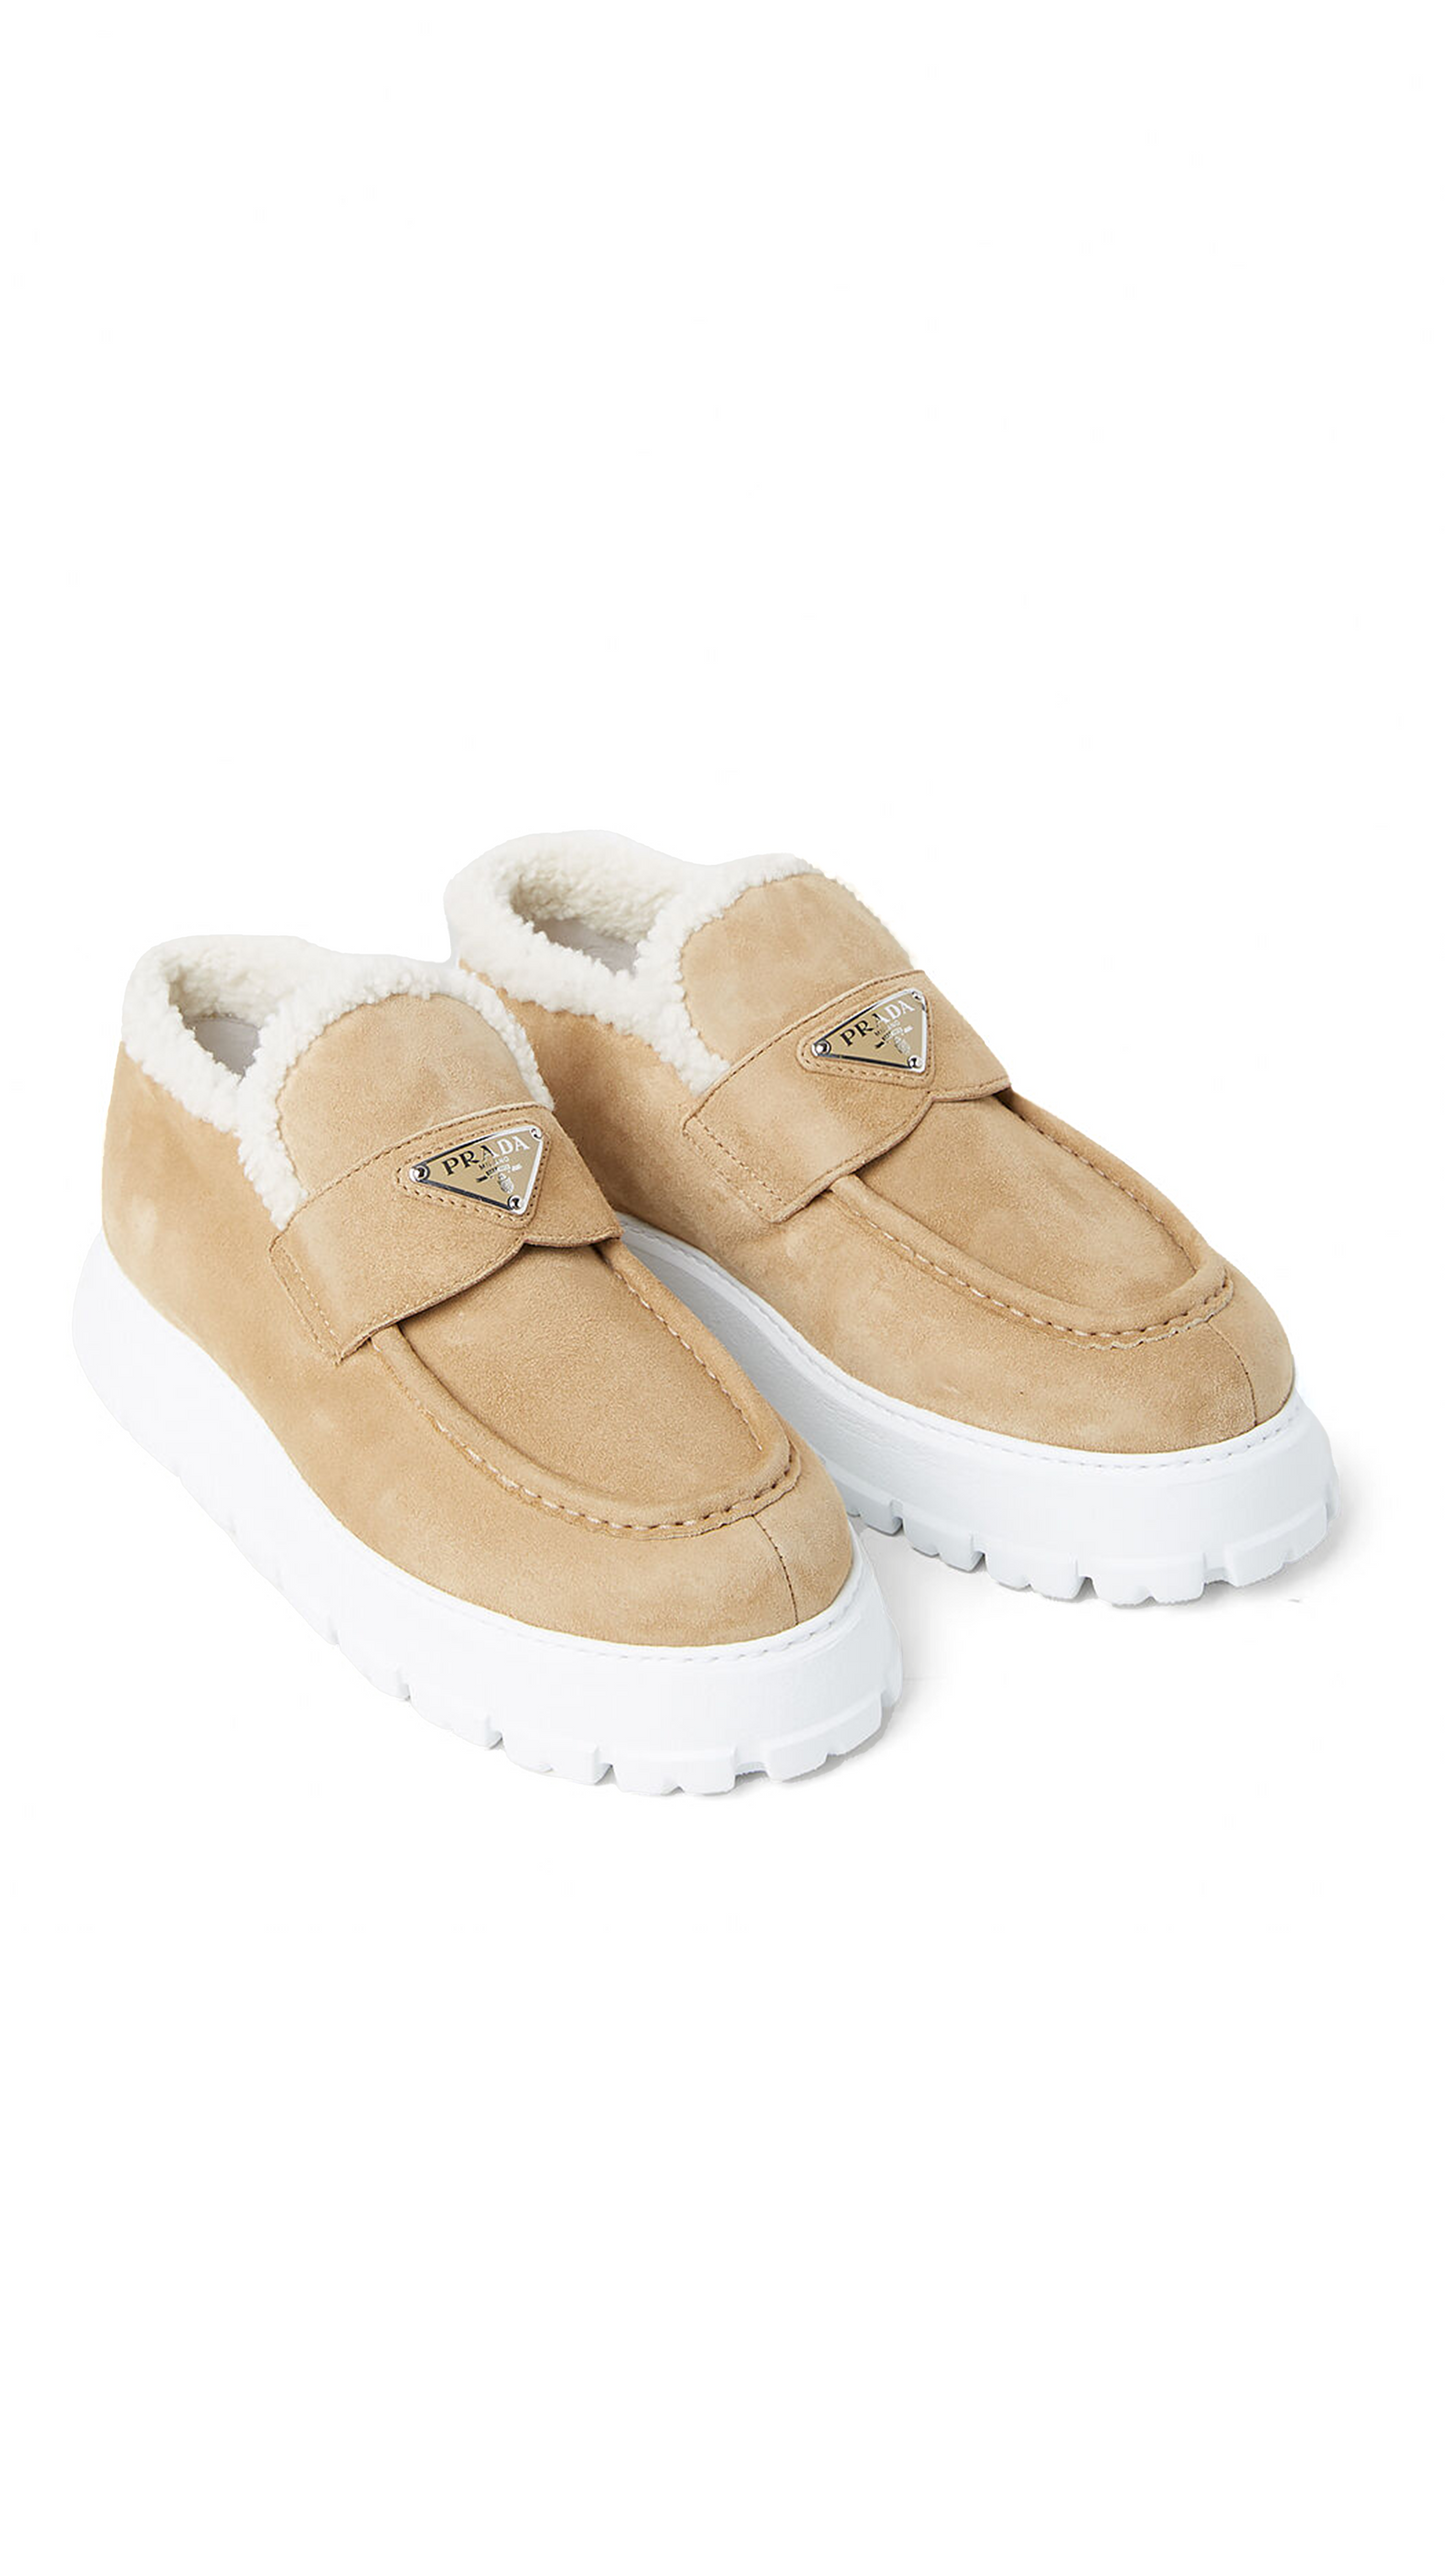 Suede Flatform Loafers with Shearling Lining - Ecru